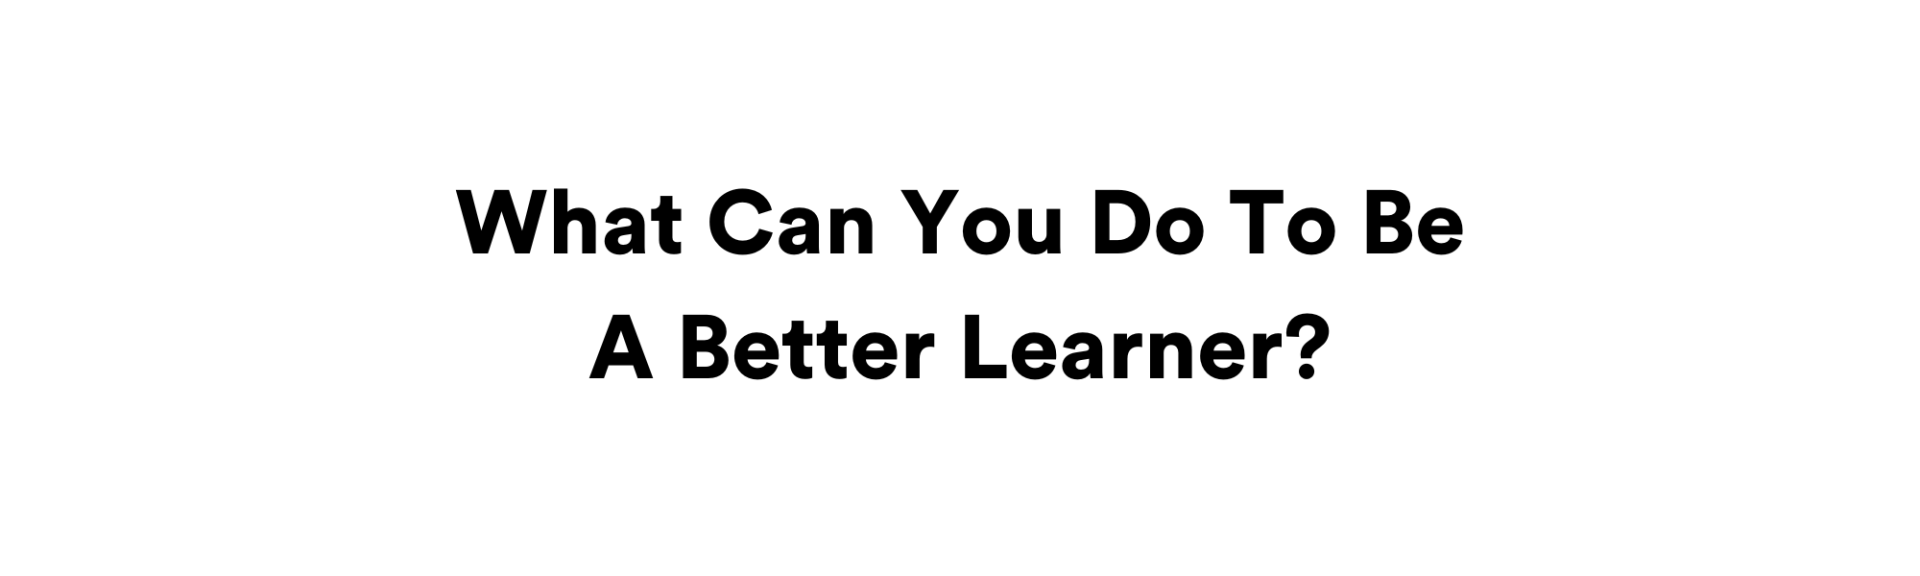 What Can You Do To Be A Better Learner?